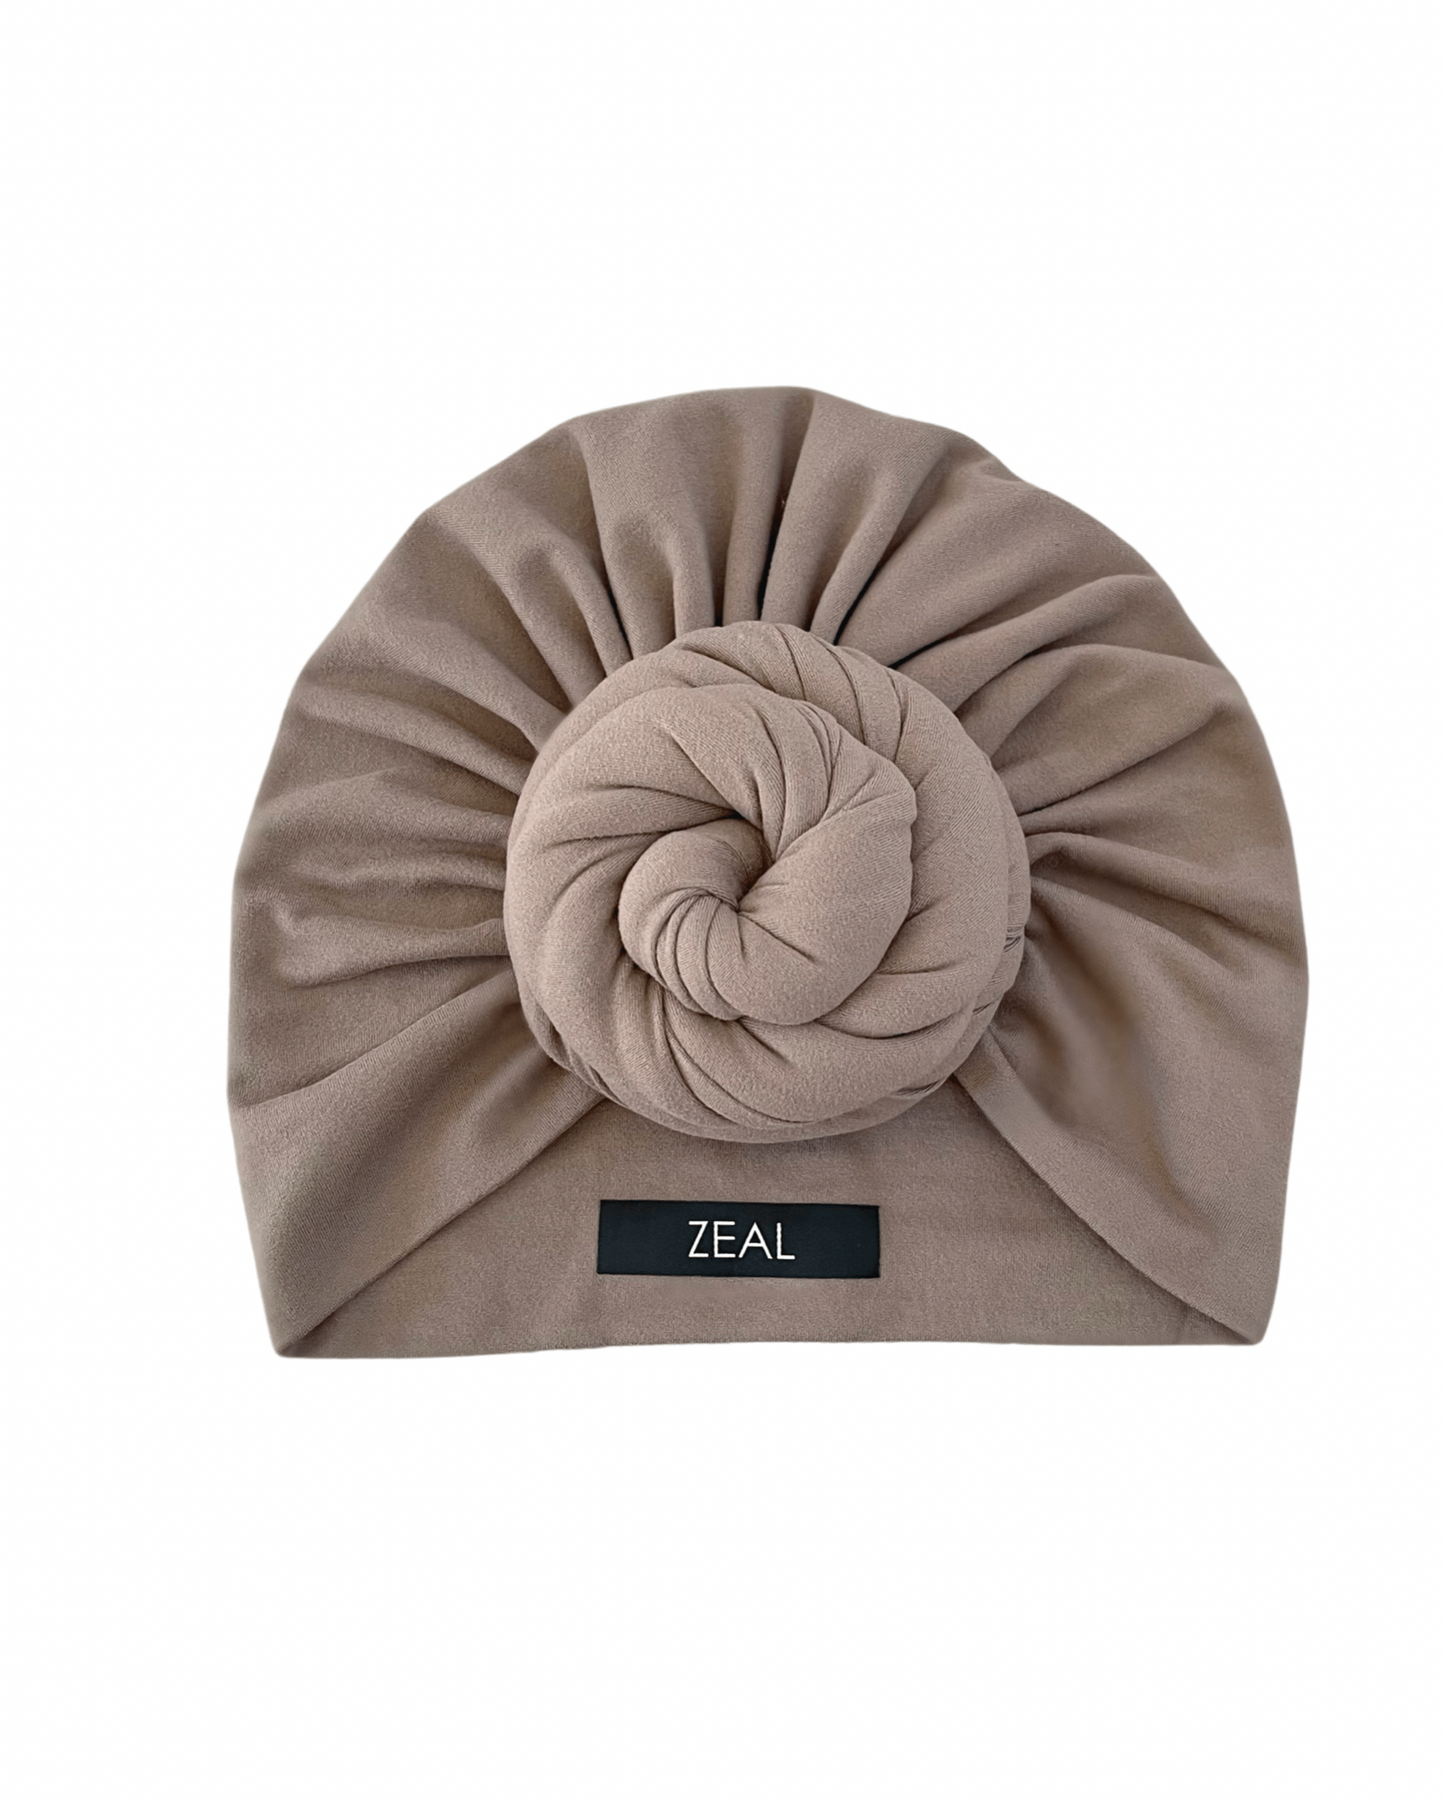 Taupe pre-tied headwrap | Very stretchy | Lightweight with medium sized bun | Chemo cap